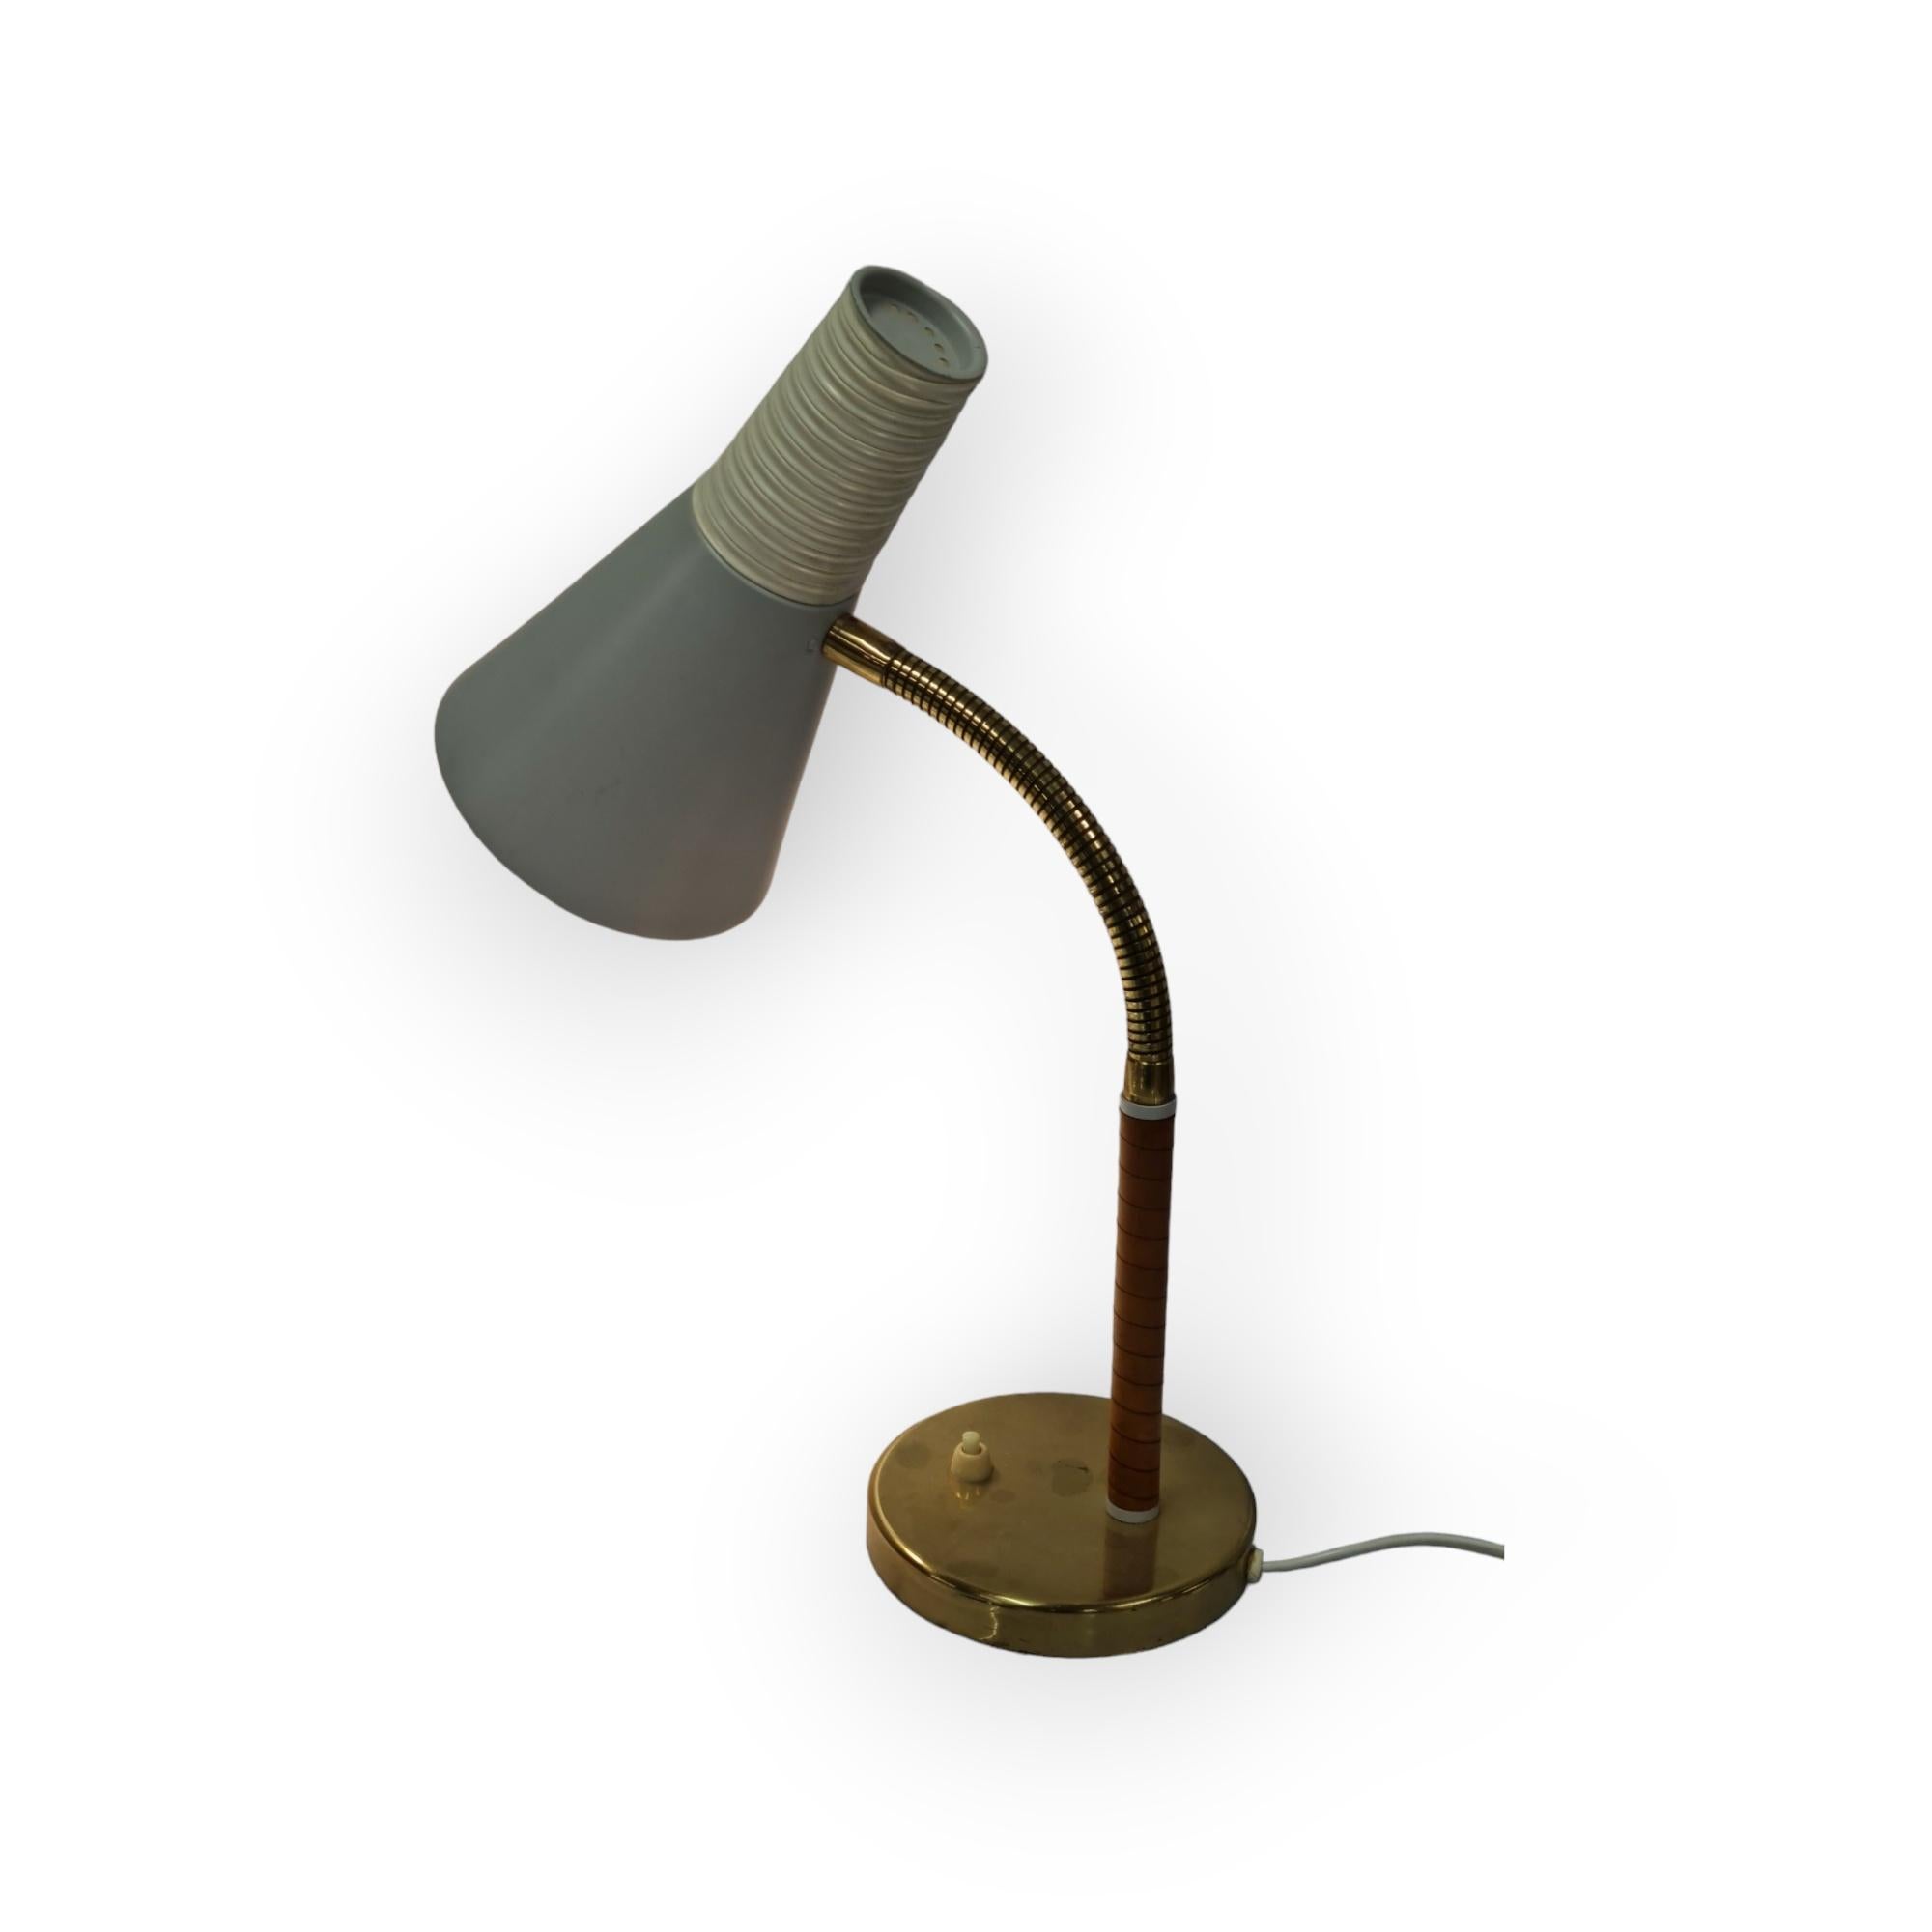 This table lamp is light and smart looking and in addition to the high quality, has a very interesting and somewhat naïve, almost cartoonish look that makes it more so interesting and highly collectable. 
Also, the design combines a wide range of